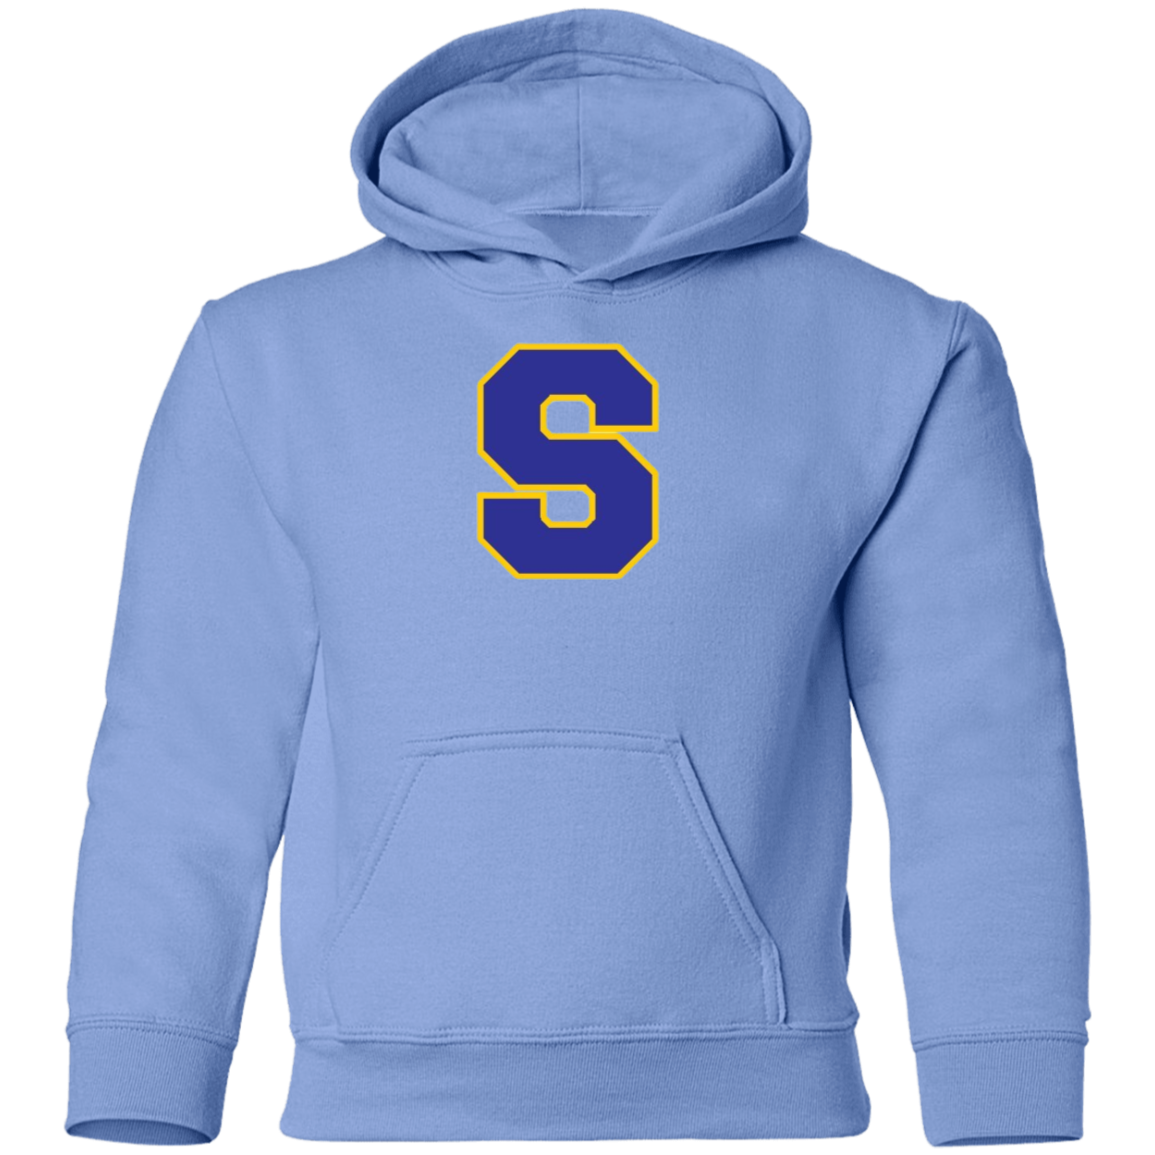 Springfield S Youth Pullover Hoodie